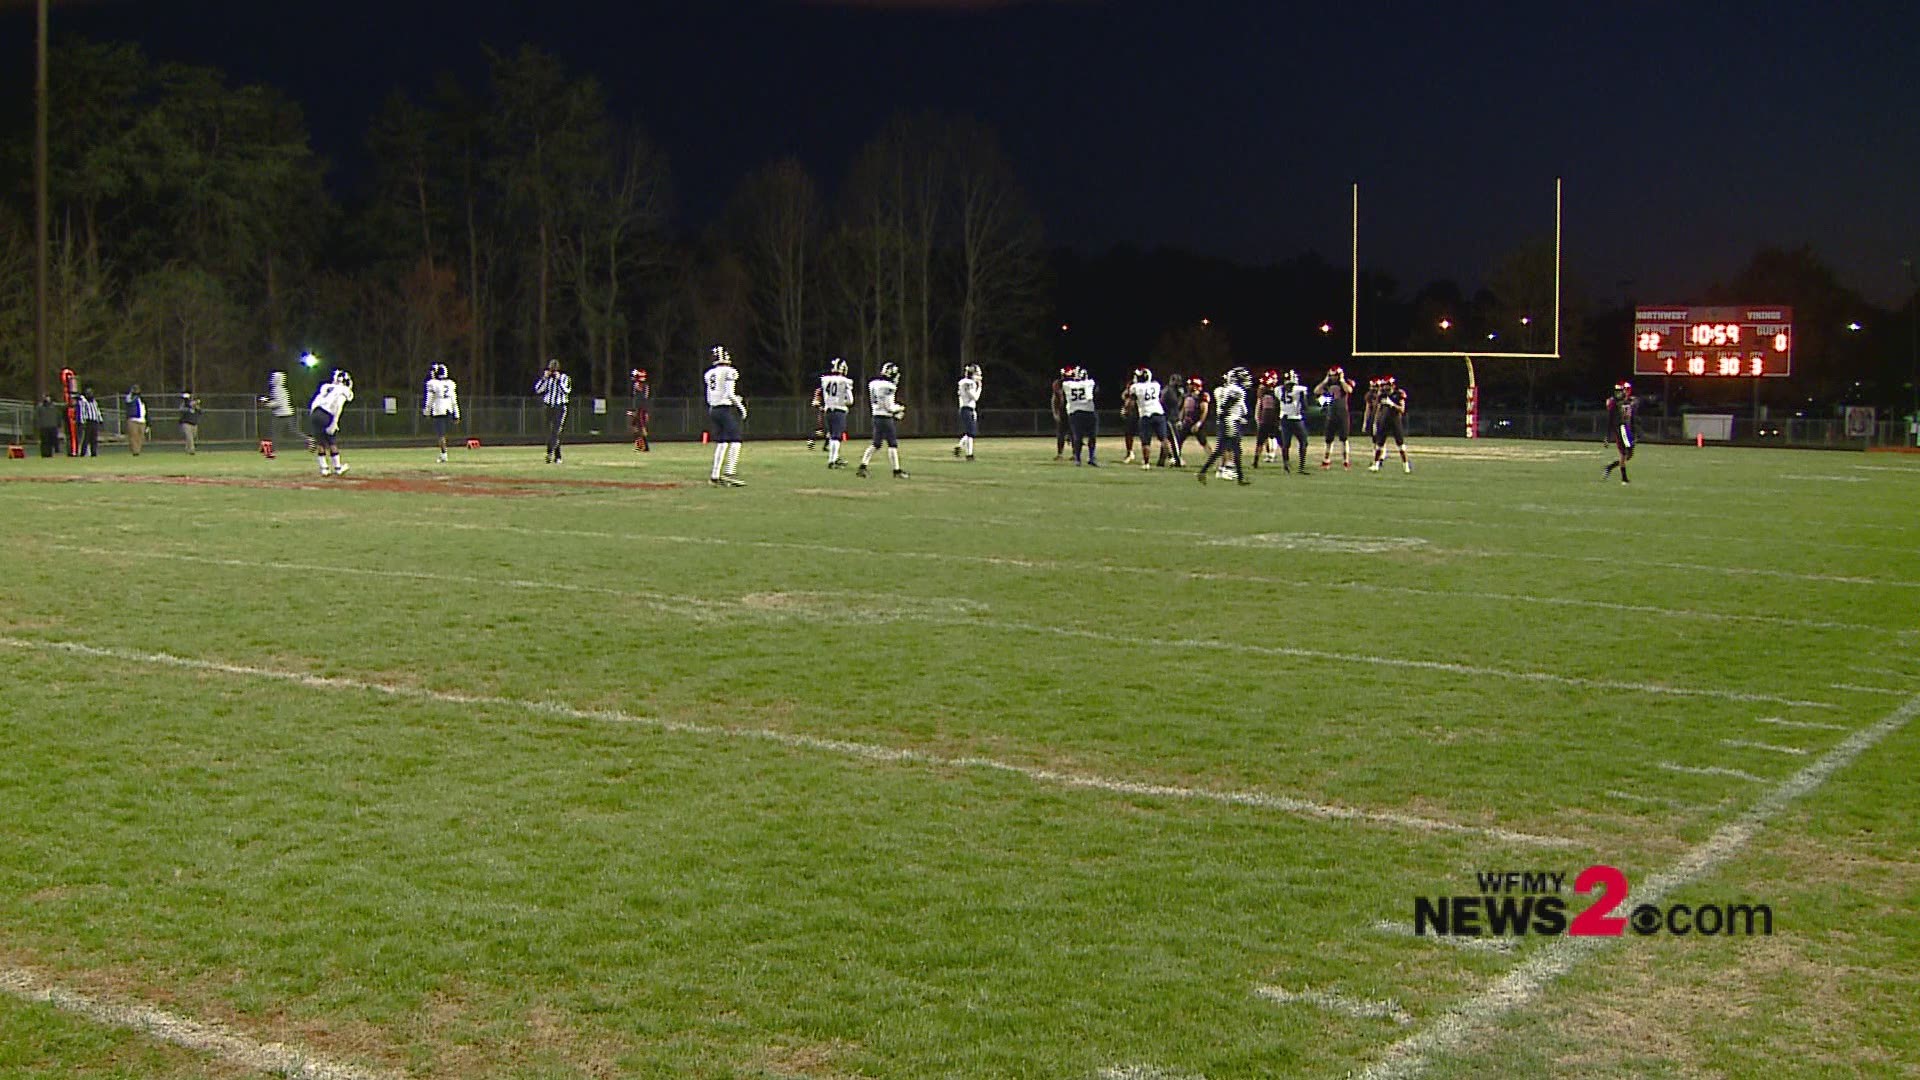 NW Guilford won 35-6 and is now 5-1 on the season.